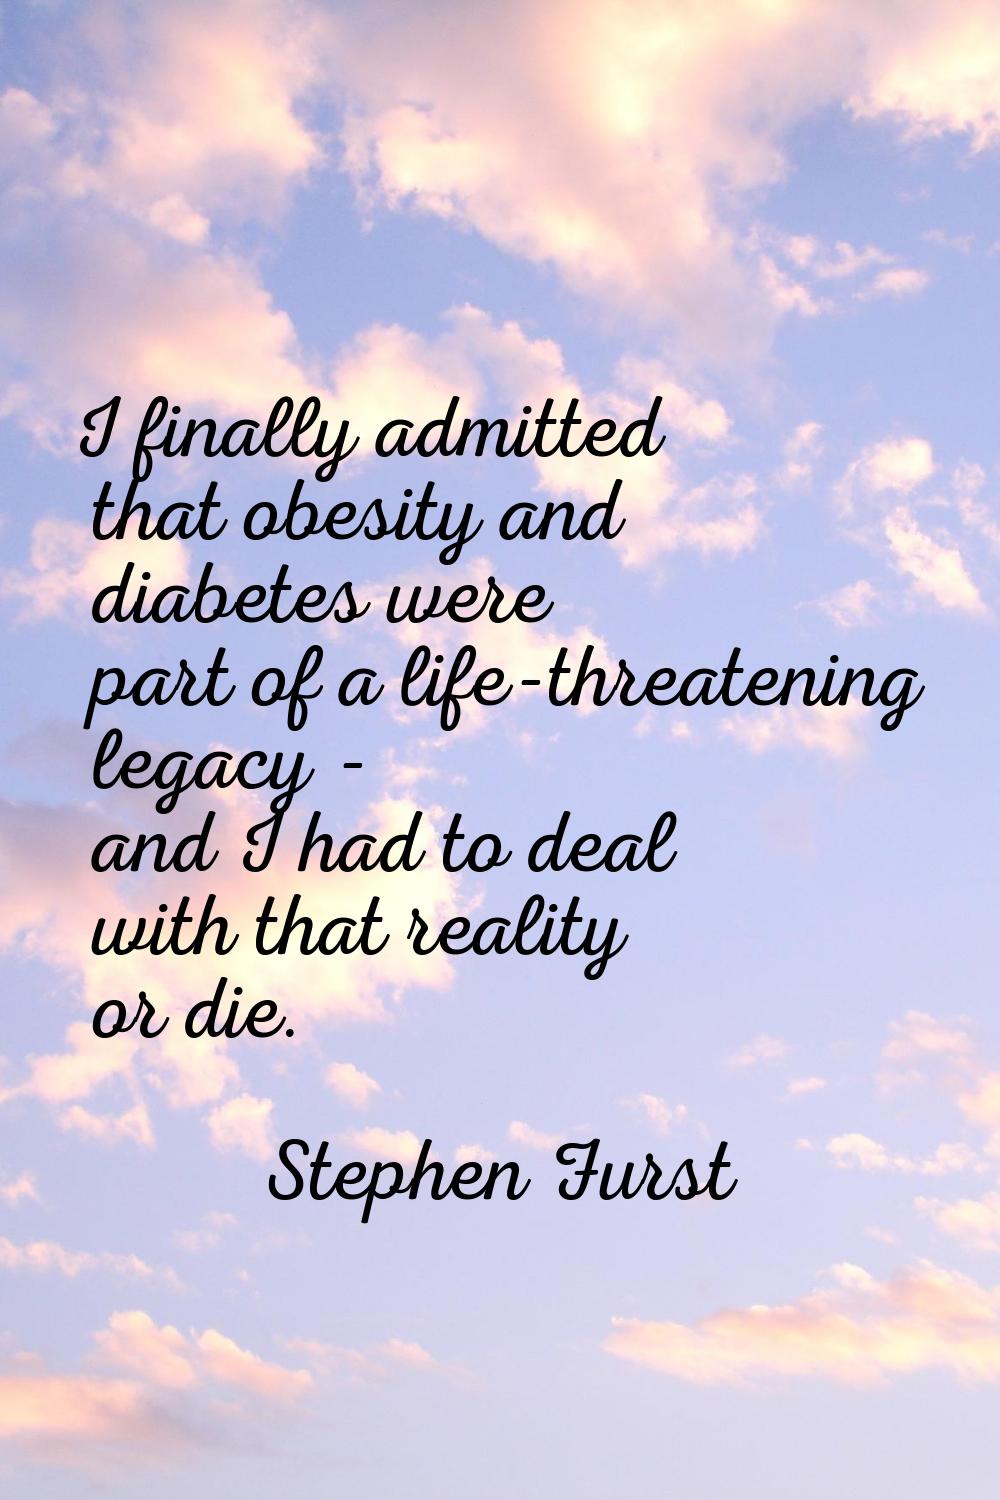 I finally admitted that obesity and diabetes were part of a life-threatening legacy - and I had to 